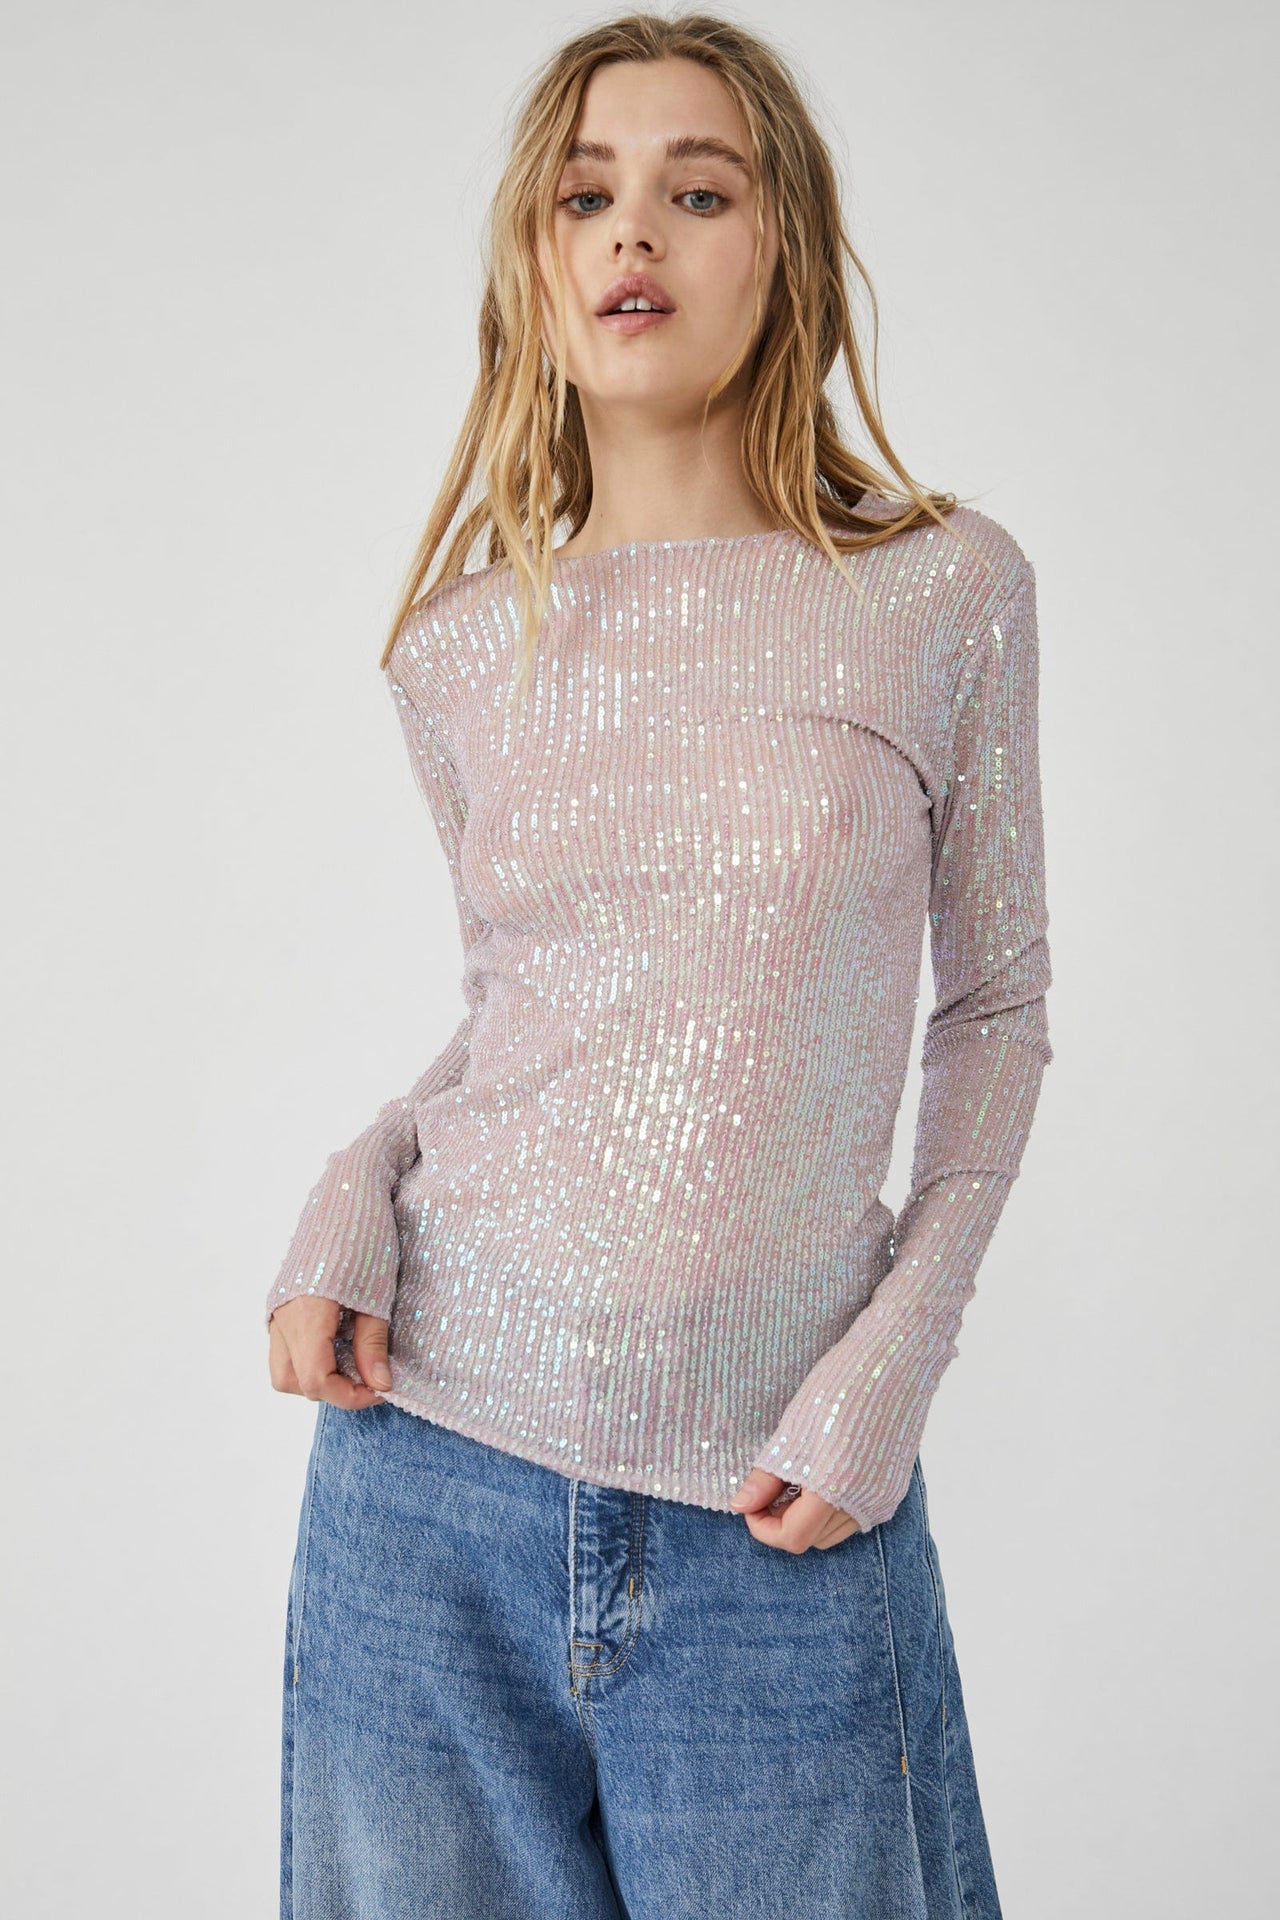 Gold Rush Sequin Long Sleeve Champagne Float, Tops Blouses by Free People | LIT Boutique